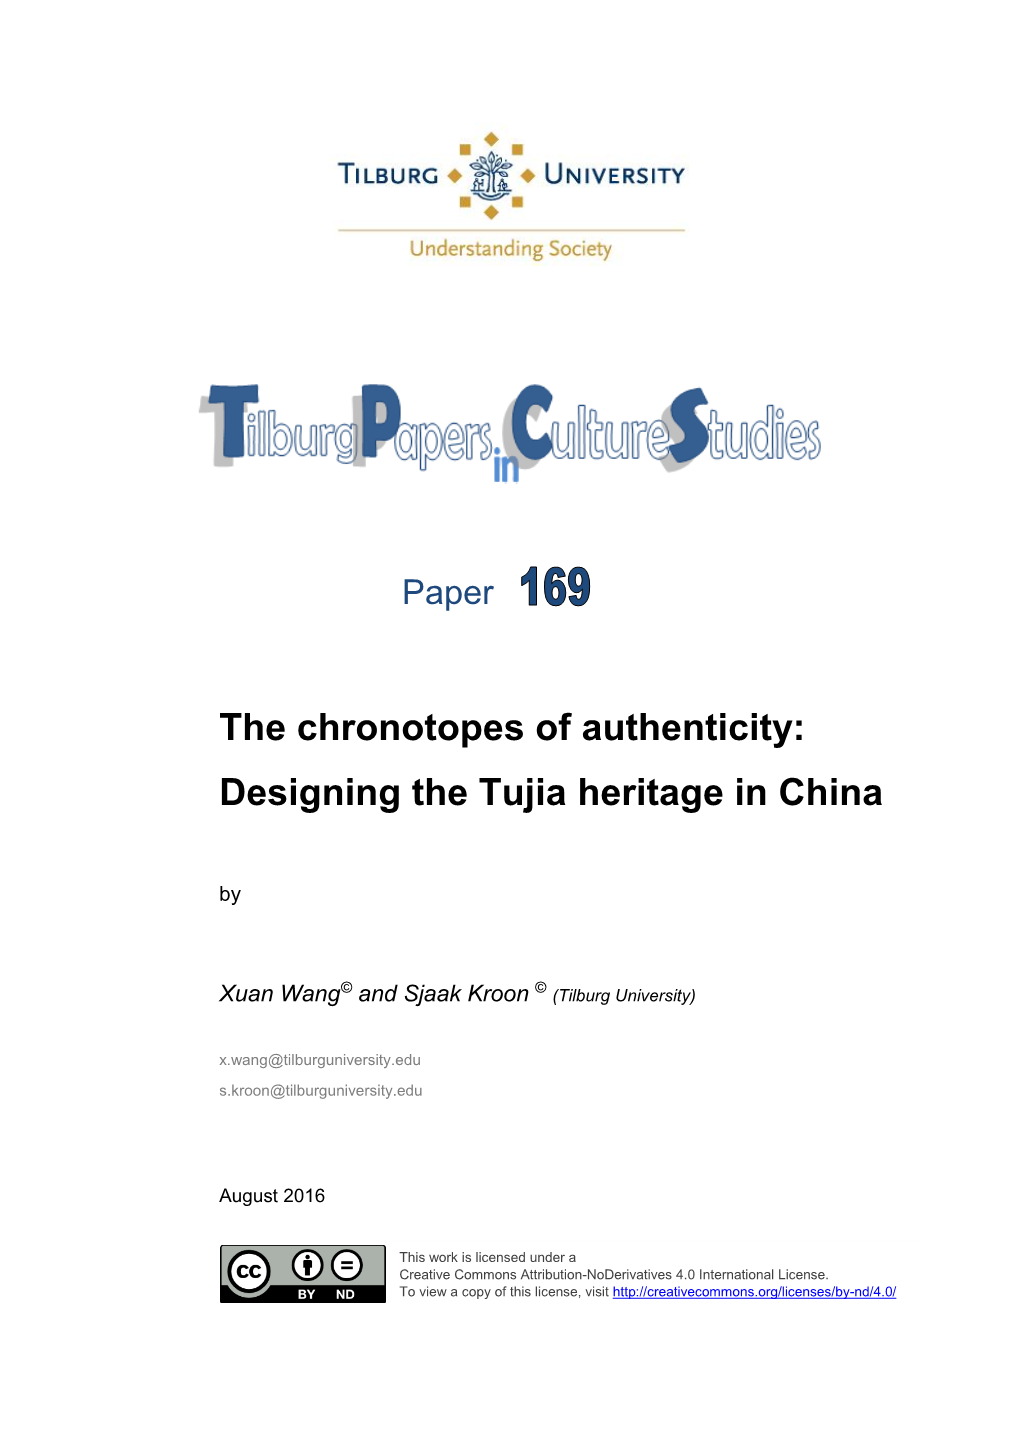 The Chronotopes of Authenticity: Designing the Tujia Heritage in China